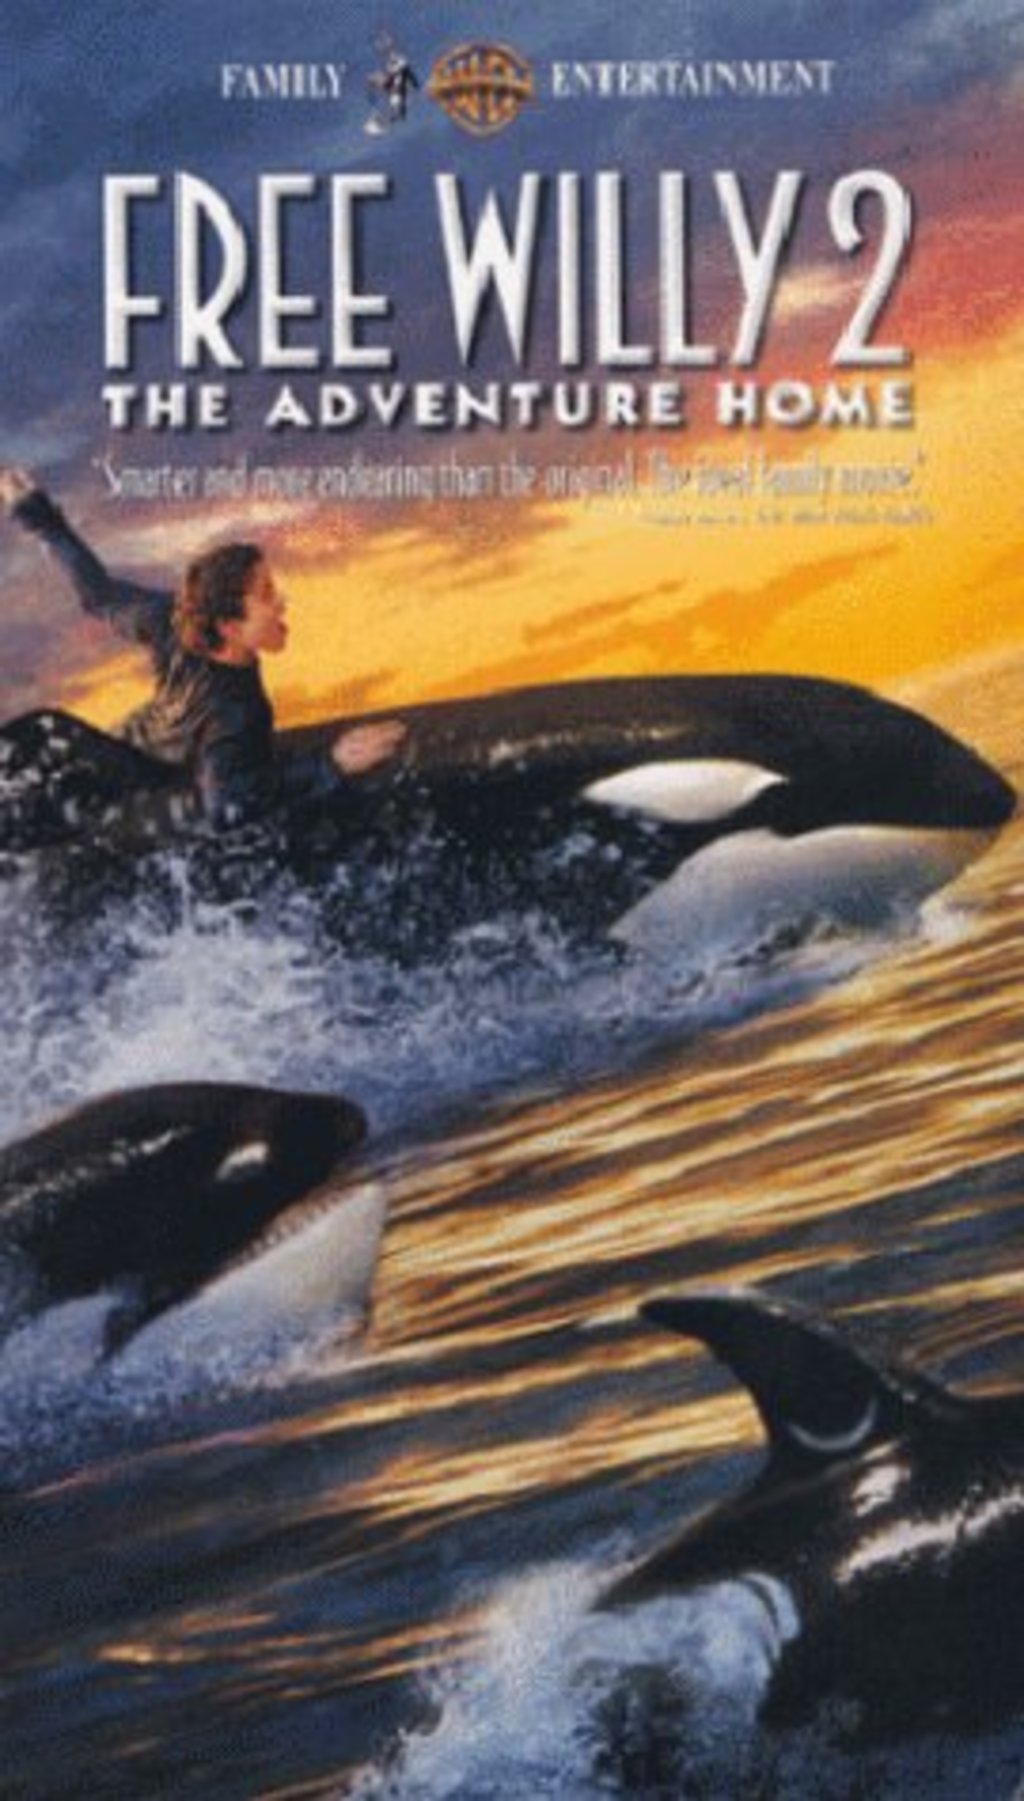 is free willy 2 on disney plus